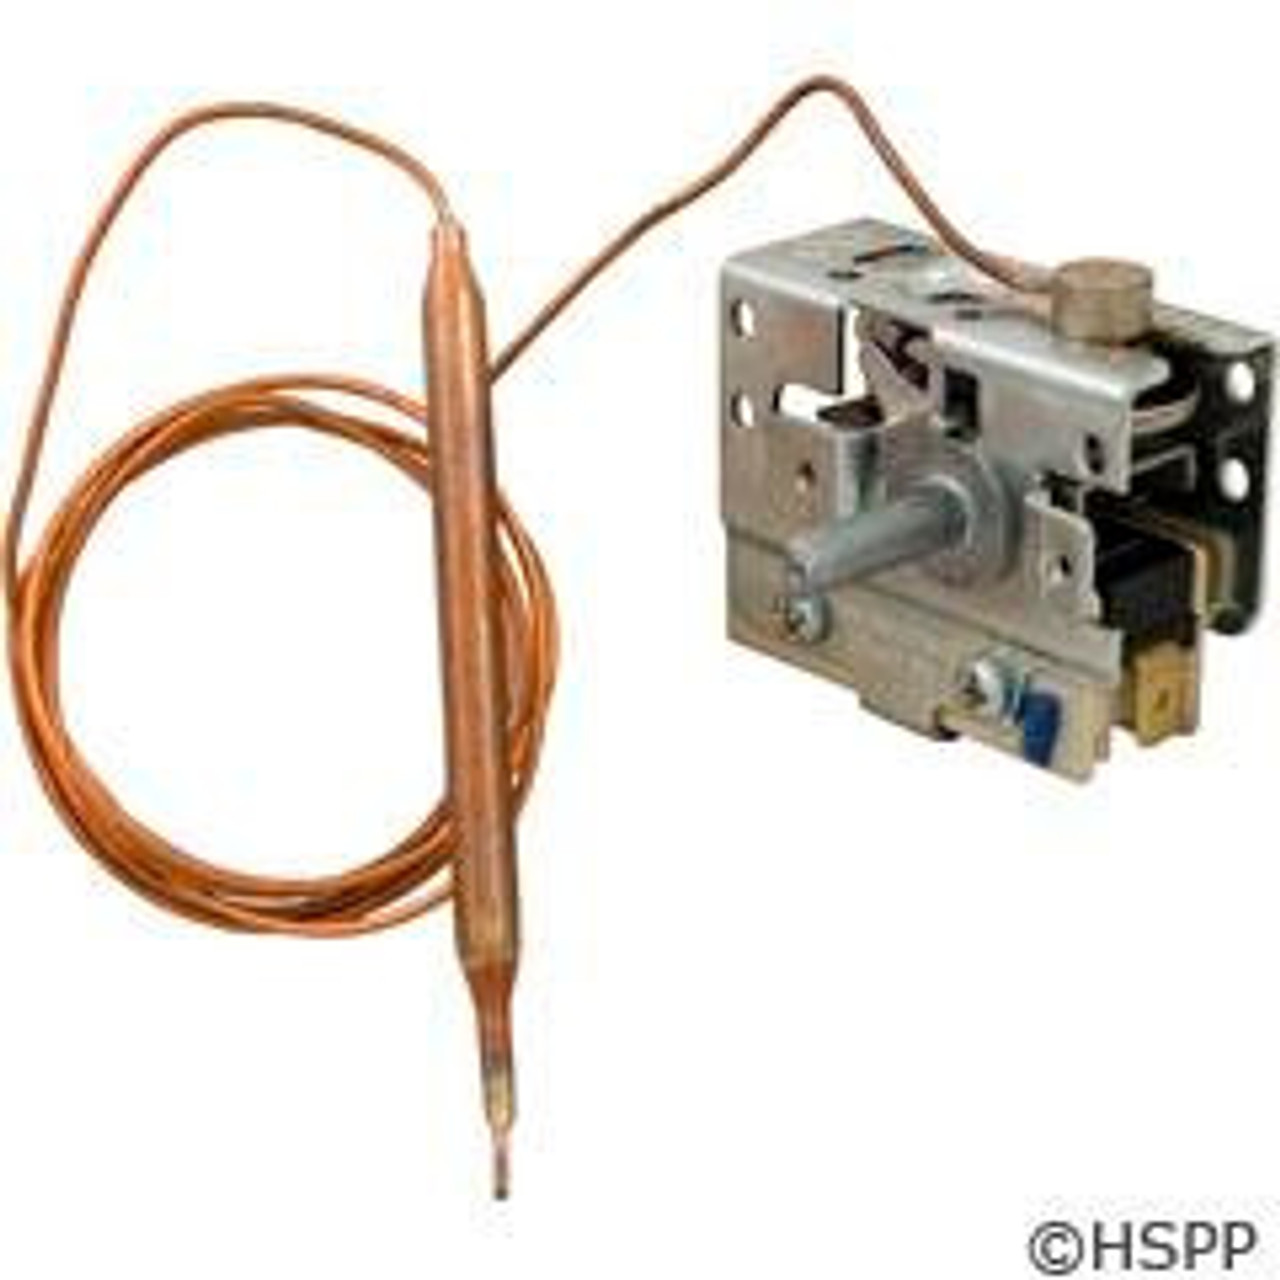 Thermostat, Invensys, 1/4", 36", SPST, 25A